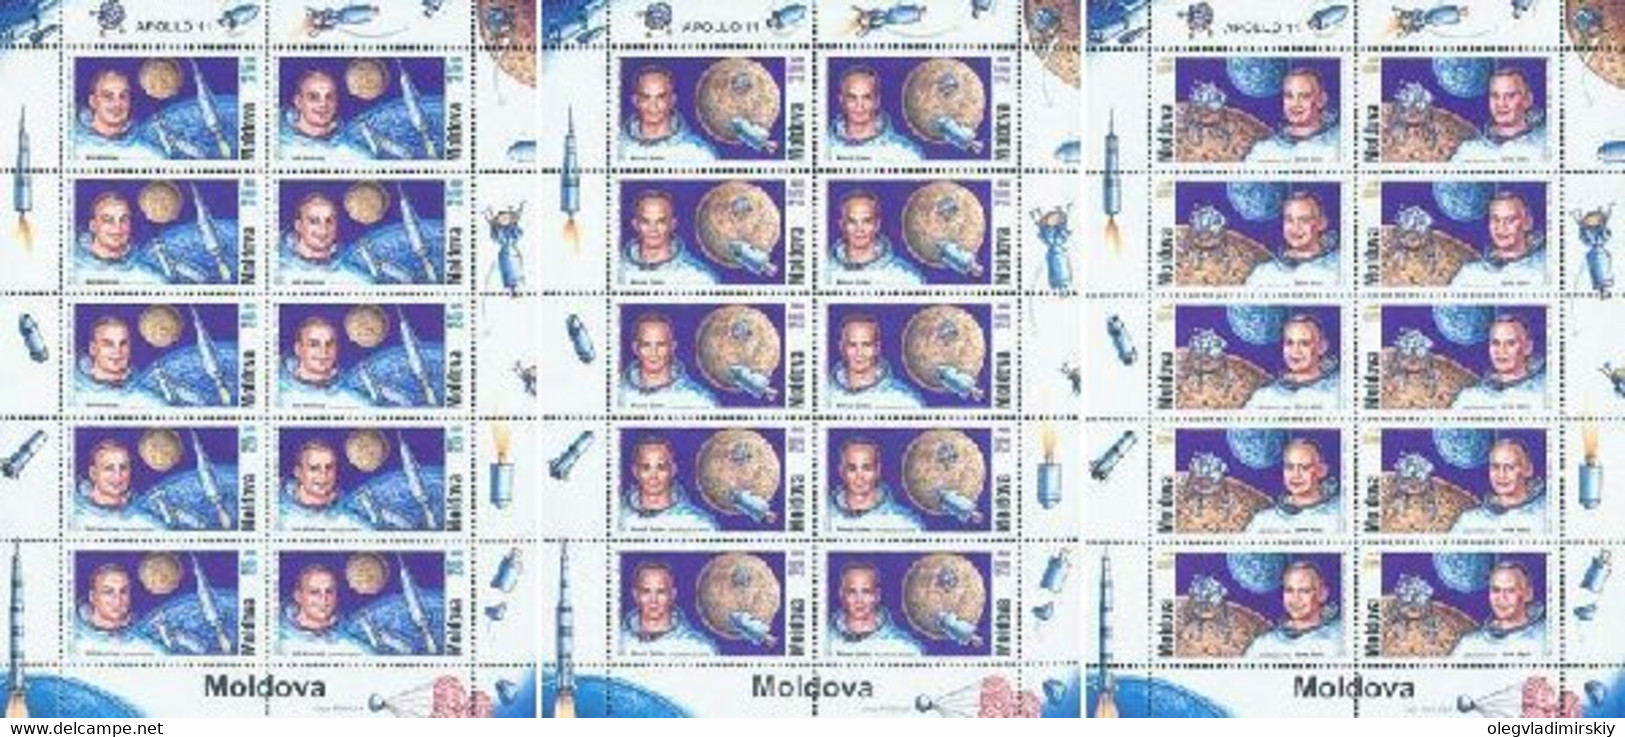 Moldavia Moldova 1999 30th Of The Moon Landing Set Of 3 Sheets Of 10 Stamps - United States